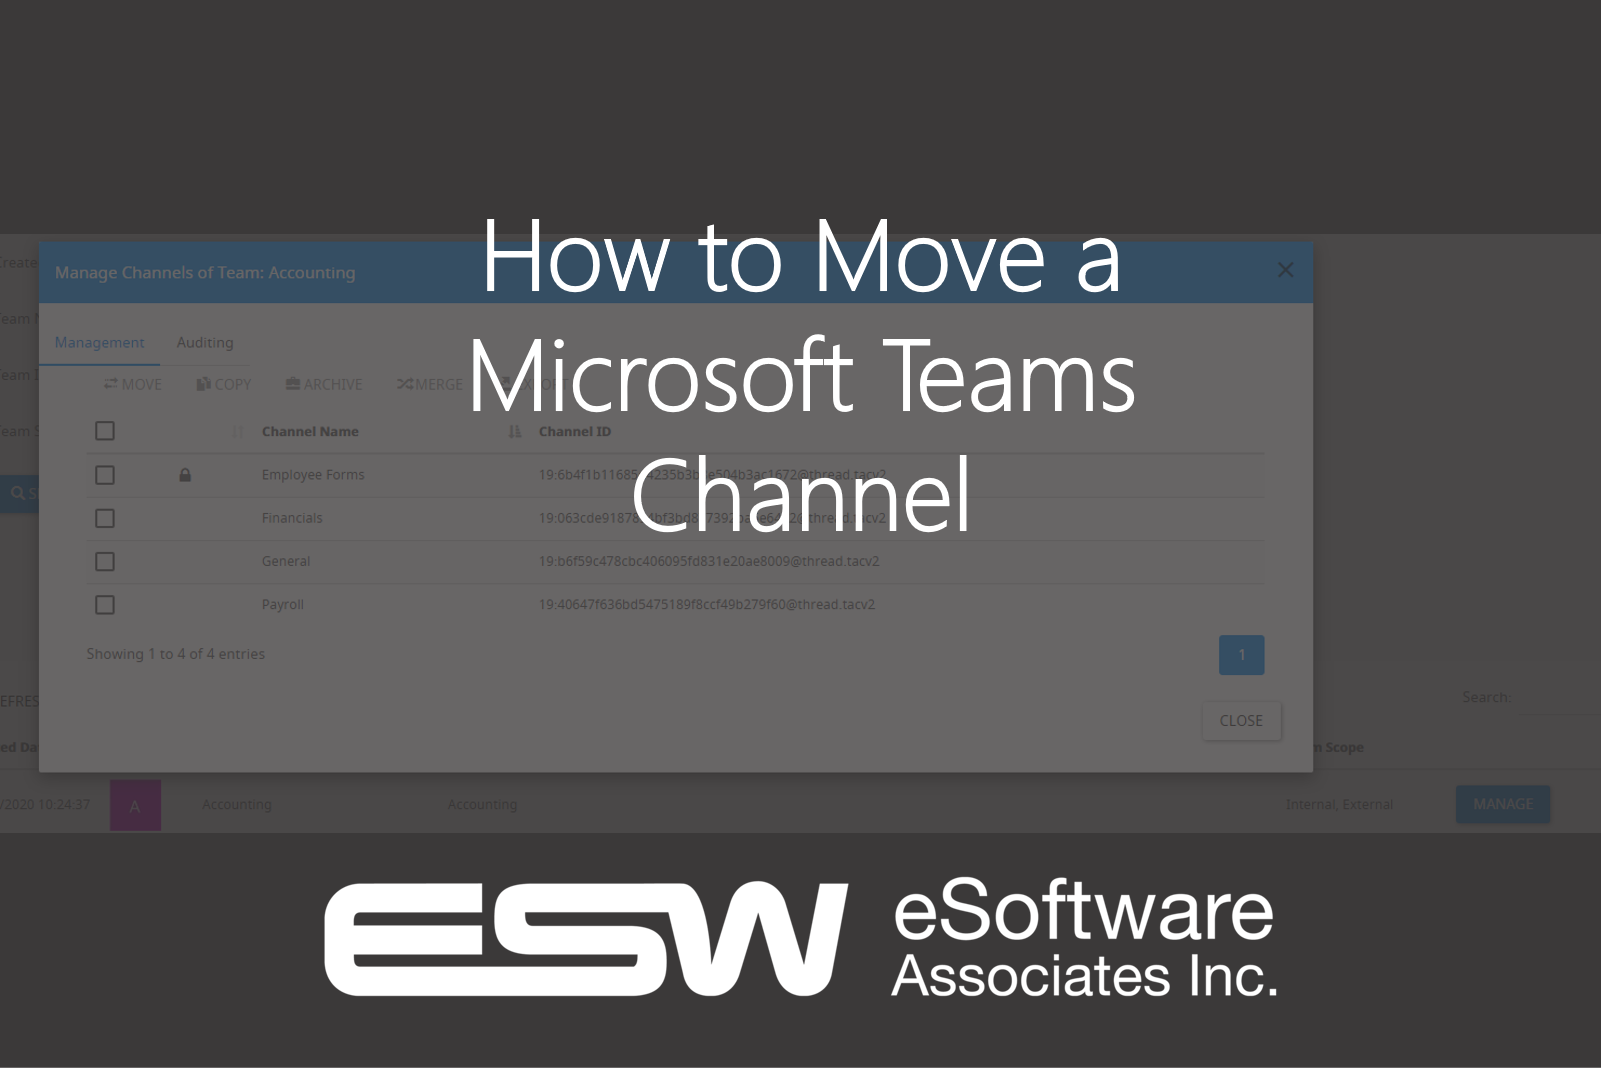 Learn How to Move a Microsoft Teams Channel